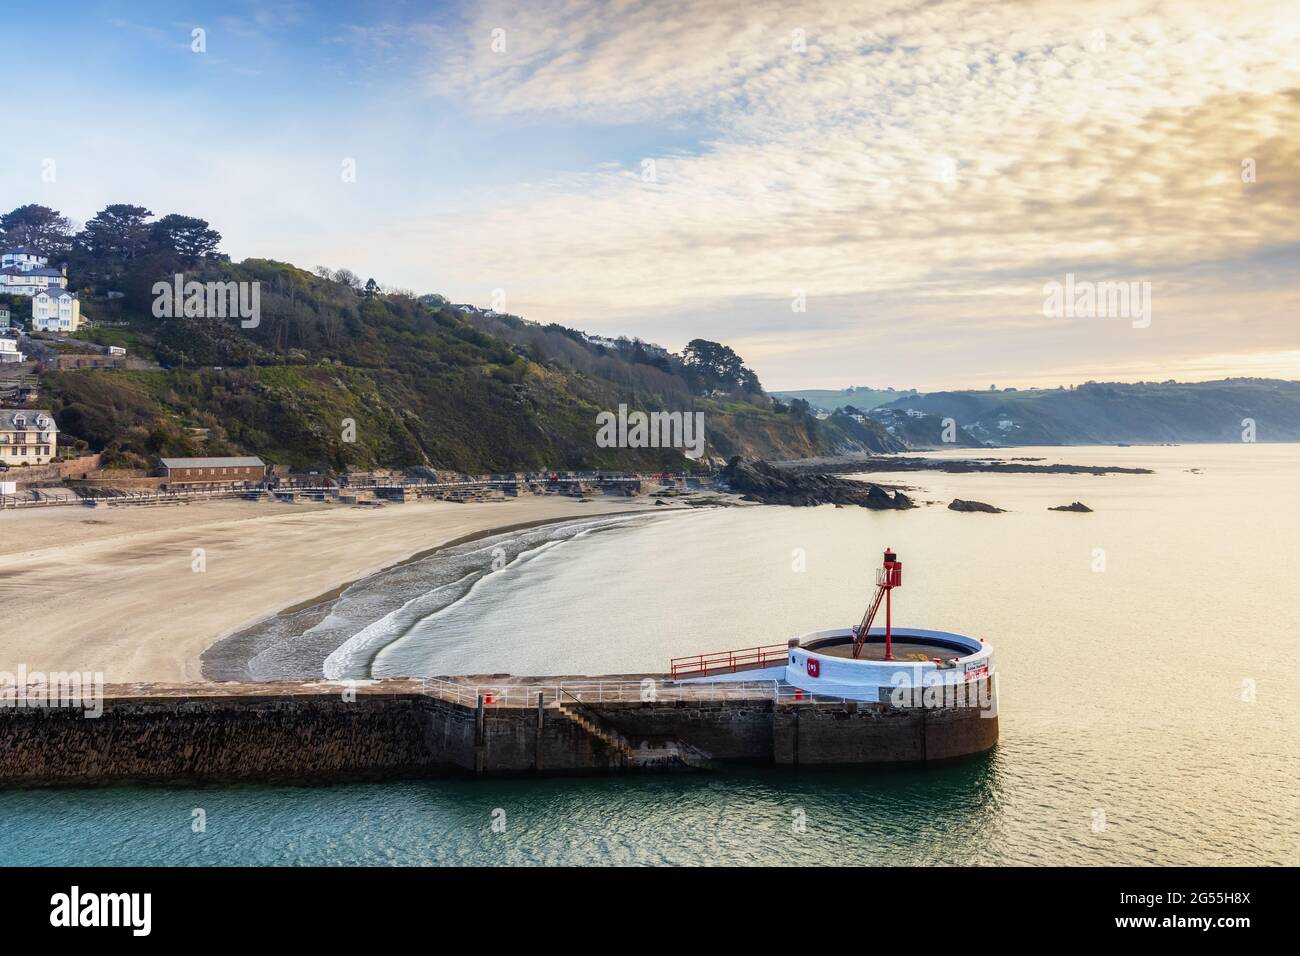 The Banjo Pier, named because of its banjo shape, and beach at Looe in Cornwall, taken shortly after sunrise. Stock Photo